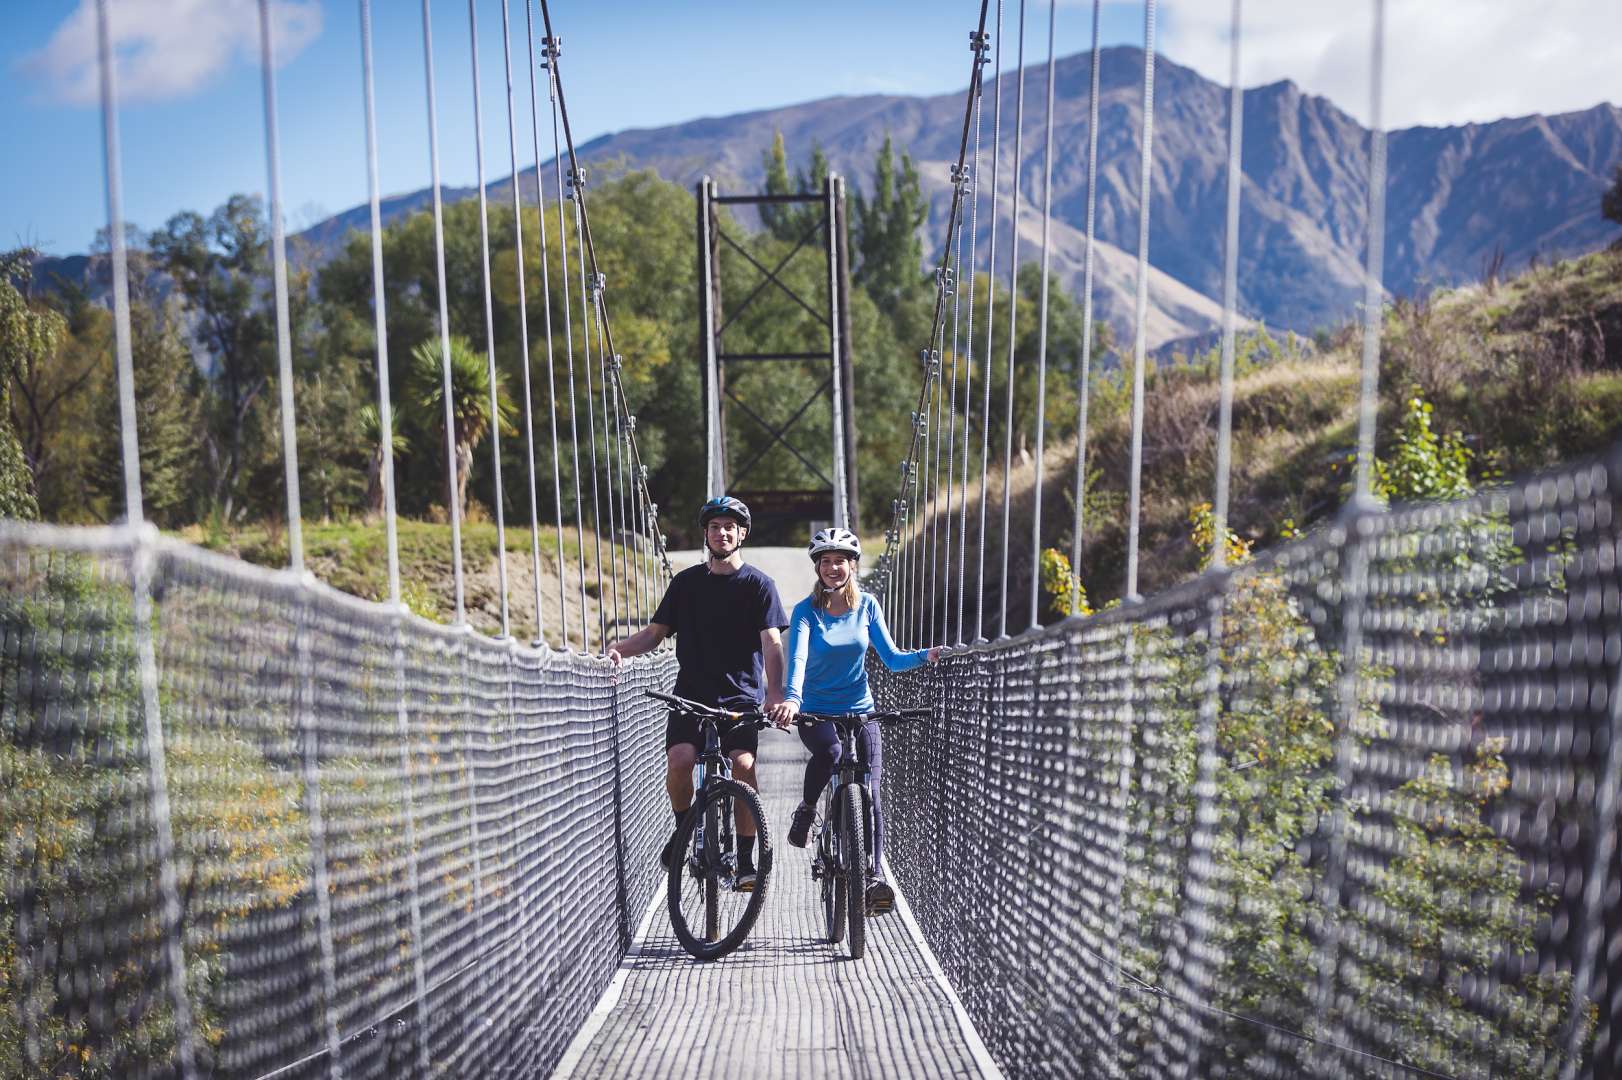 Stunning cycle trail including suspension bridges